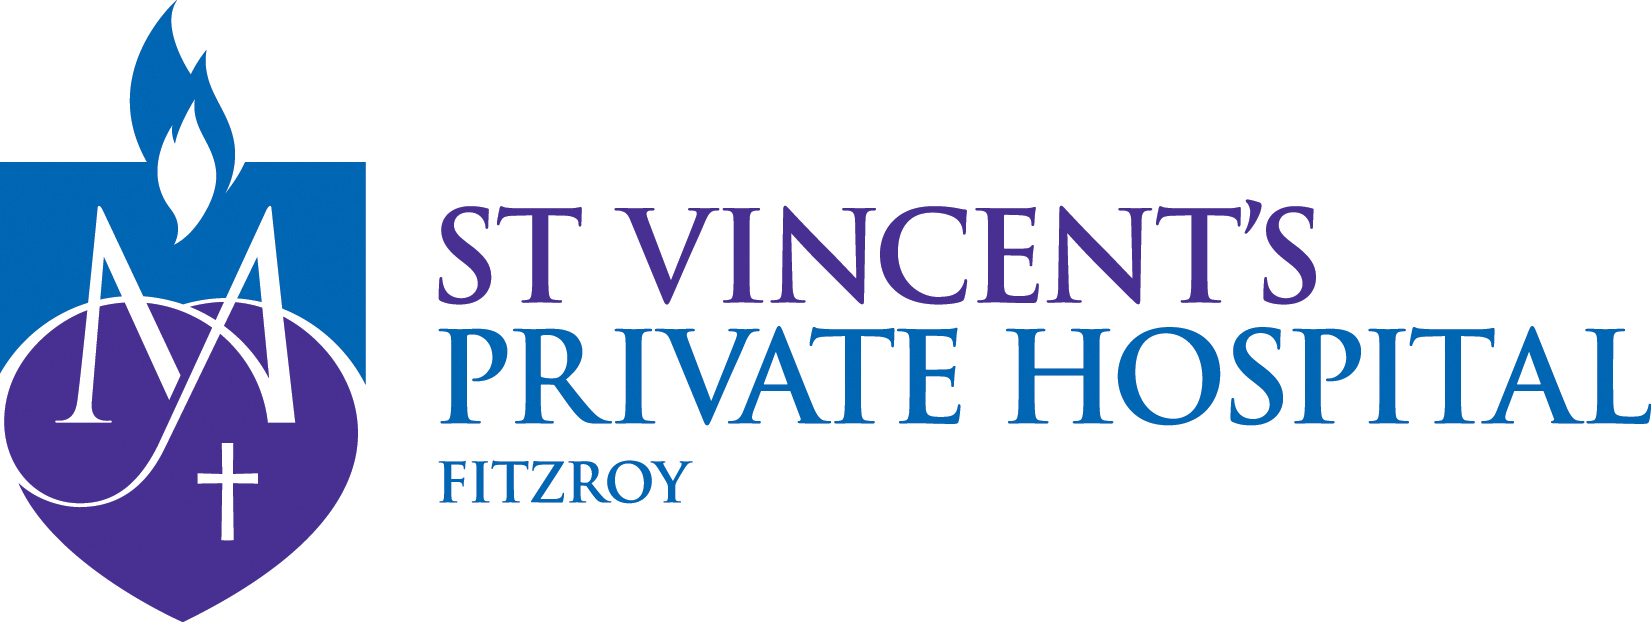 St Vincent's Private Hospital Fitzroy